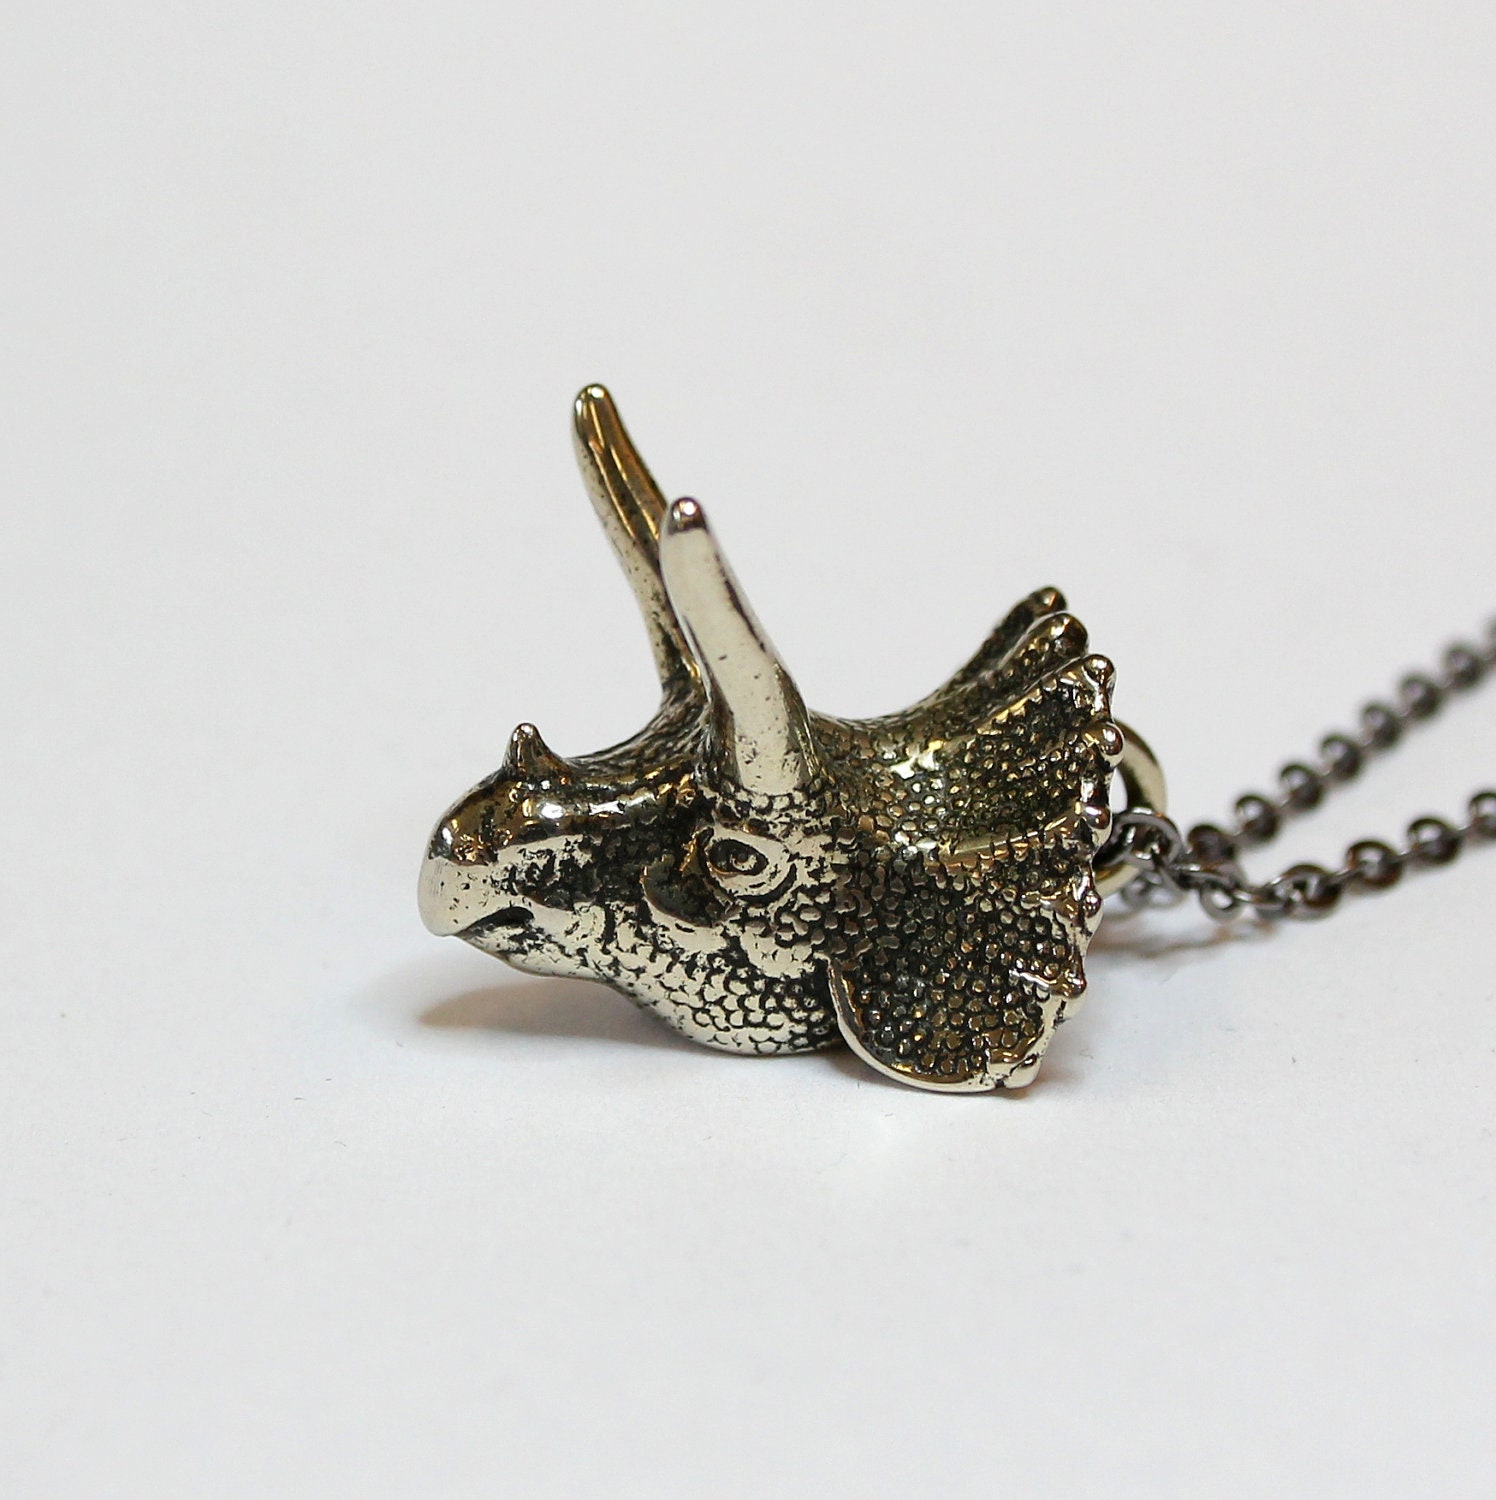 3D Triceratops Dinosaur Necklace in Solid White Bronze Triceratops Pendant